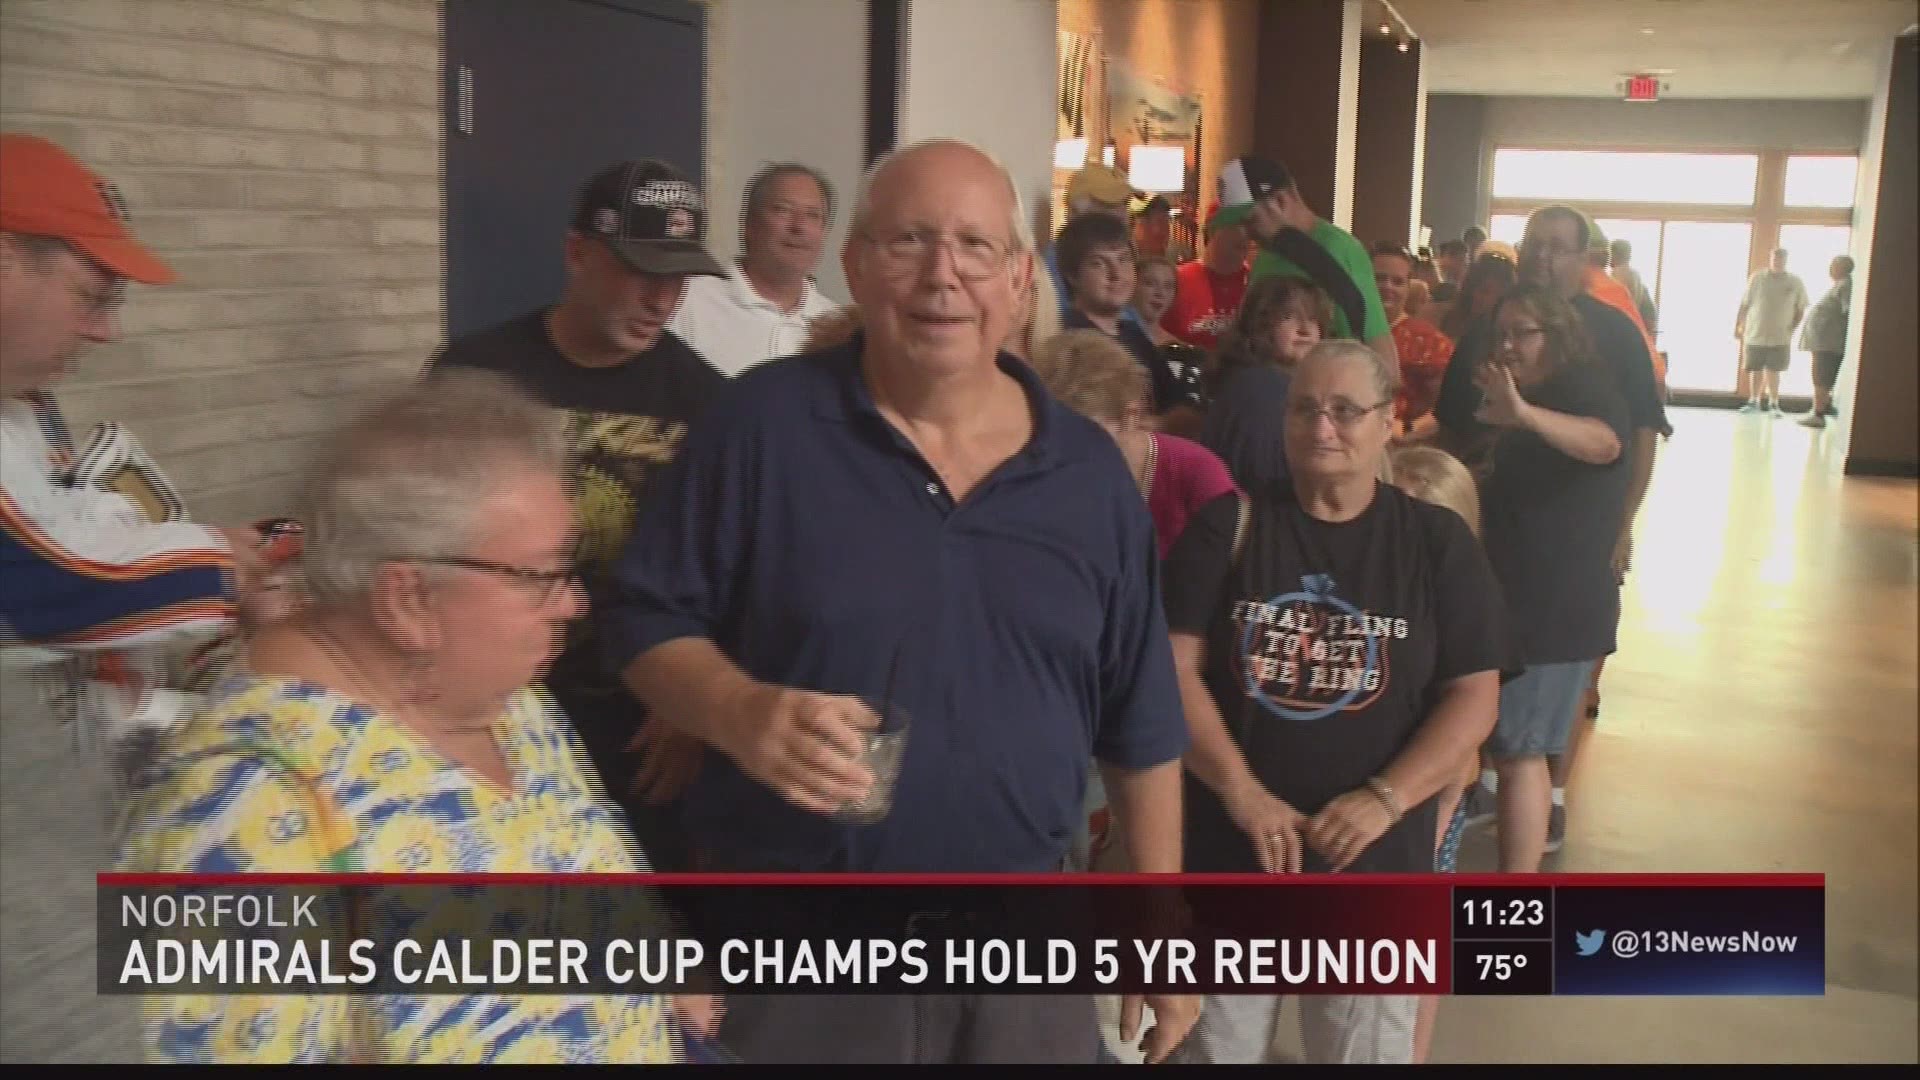 The 2012 Calder Cup Champion Norfolk Adrmirals returned to town for their 5 year reunion before about 500 fans in downtown.